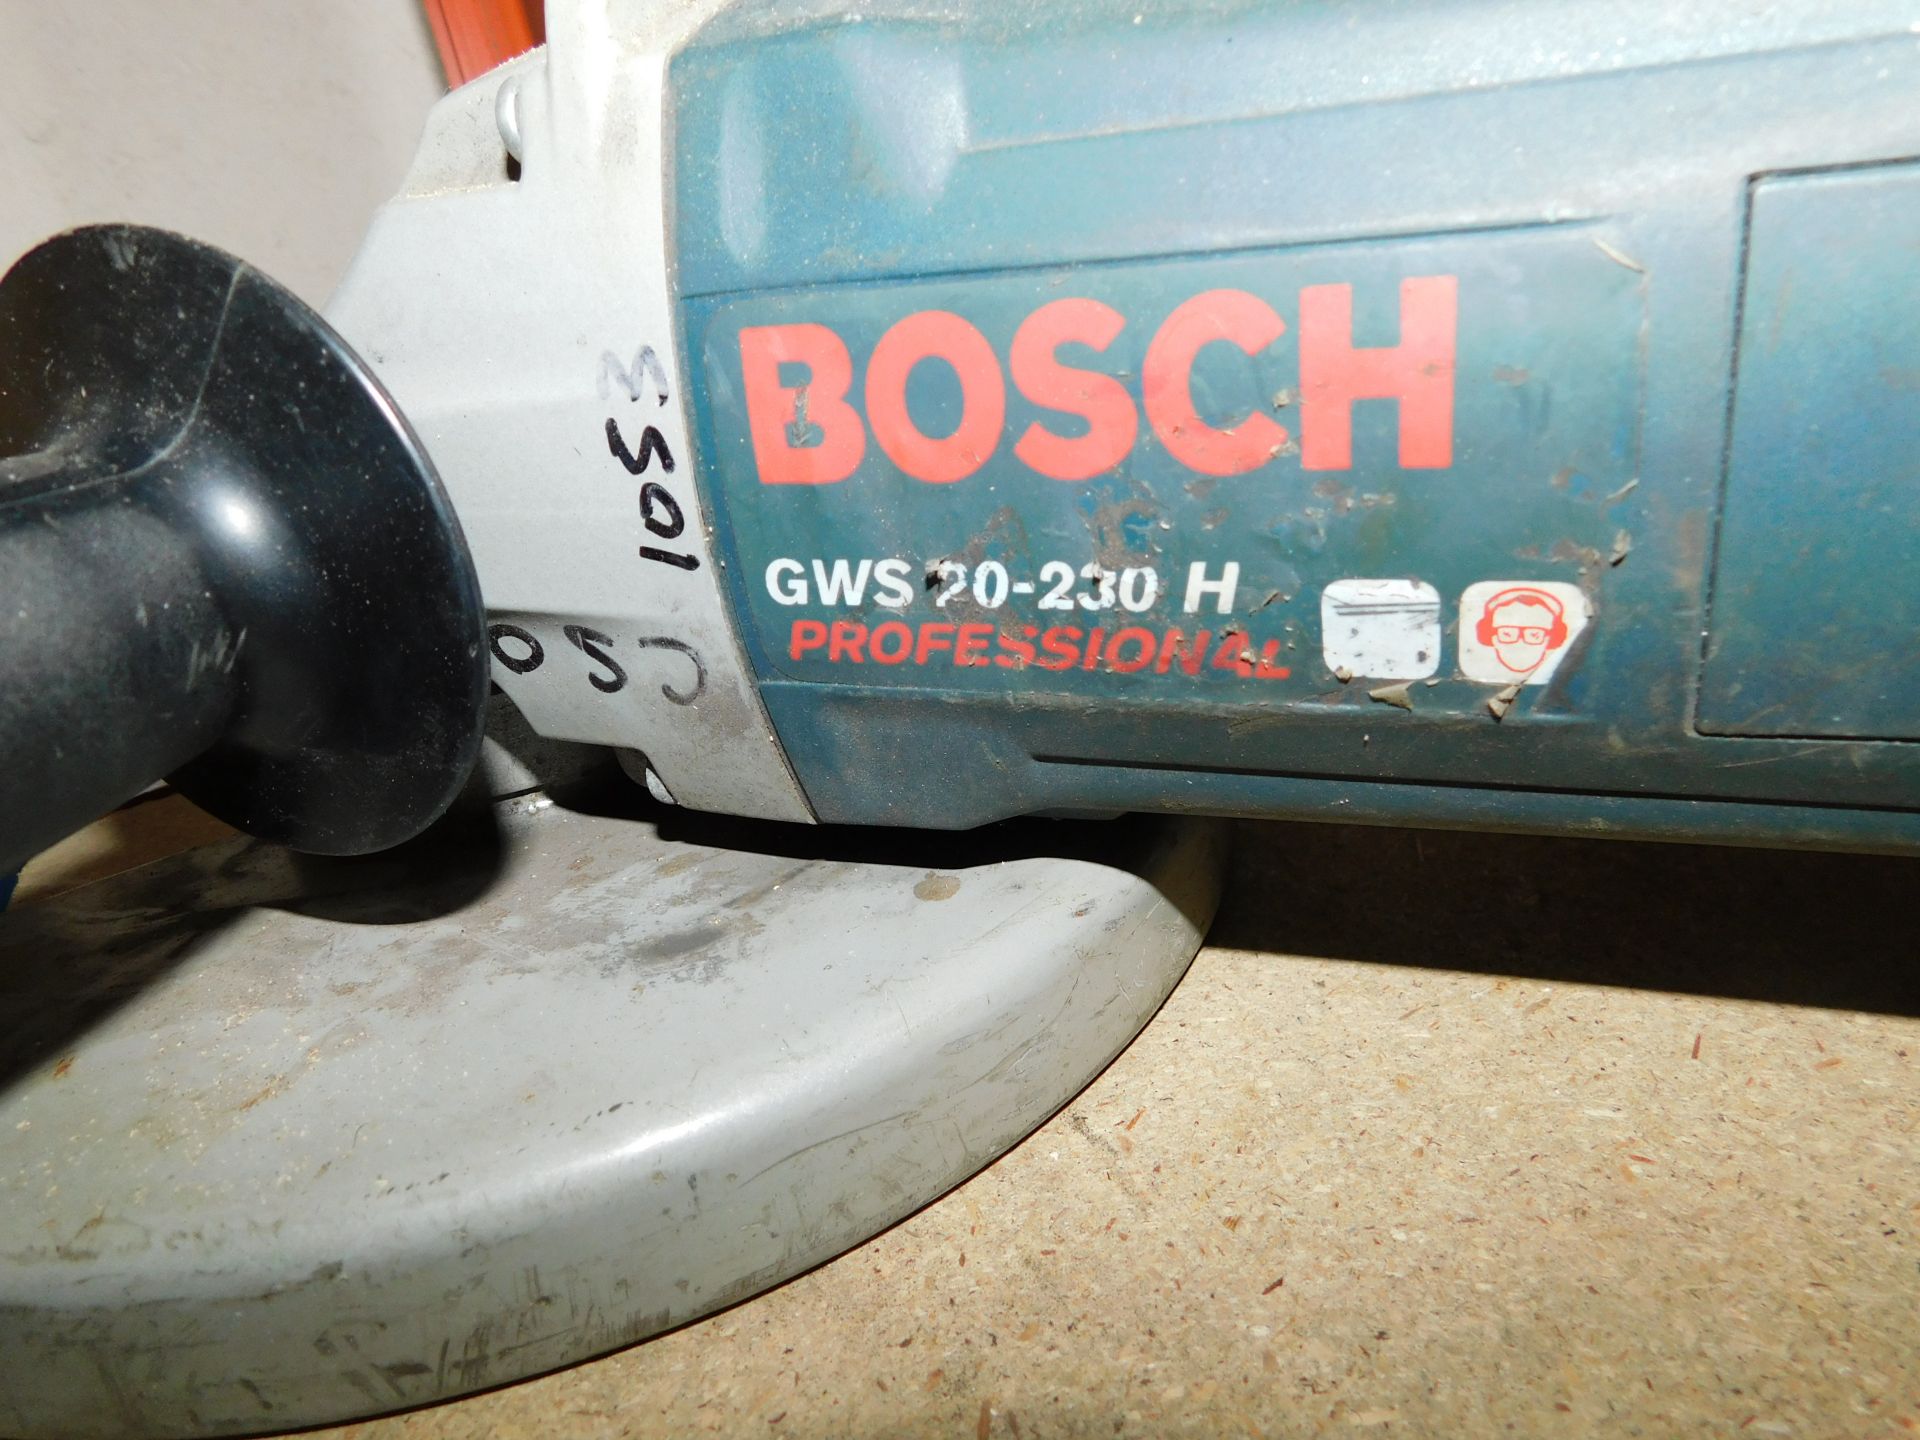 2 Bosch GWS 20-230H Angle Grinders (110v) (Location: Stockport. Please Refer to General Notes) - Image 3 of 3